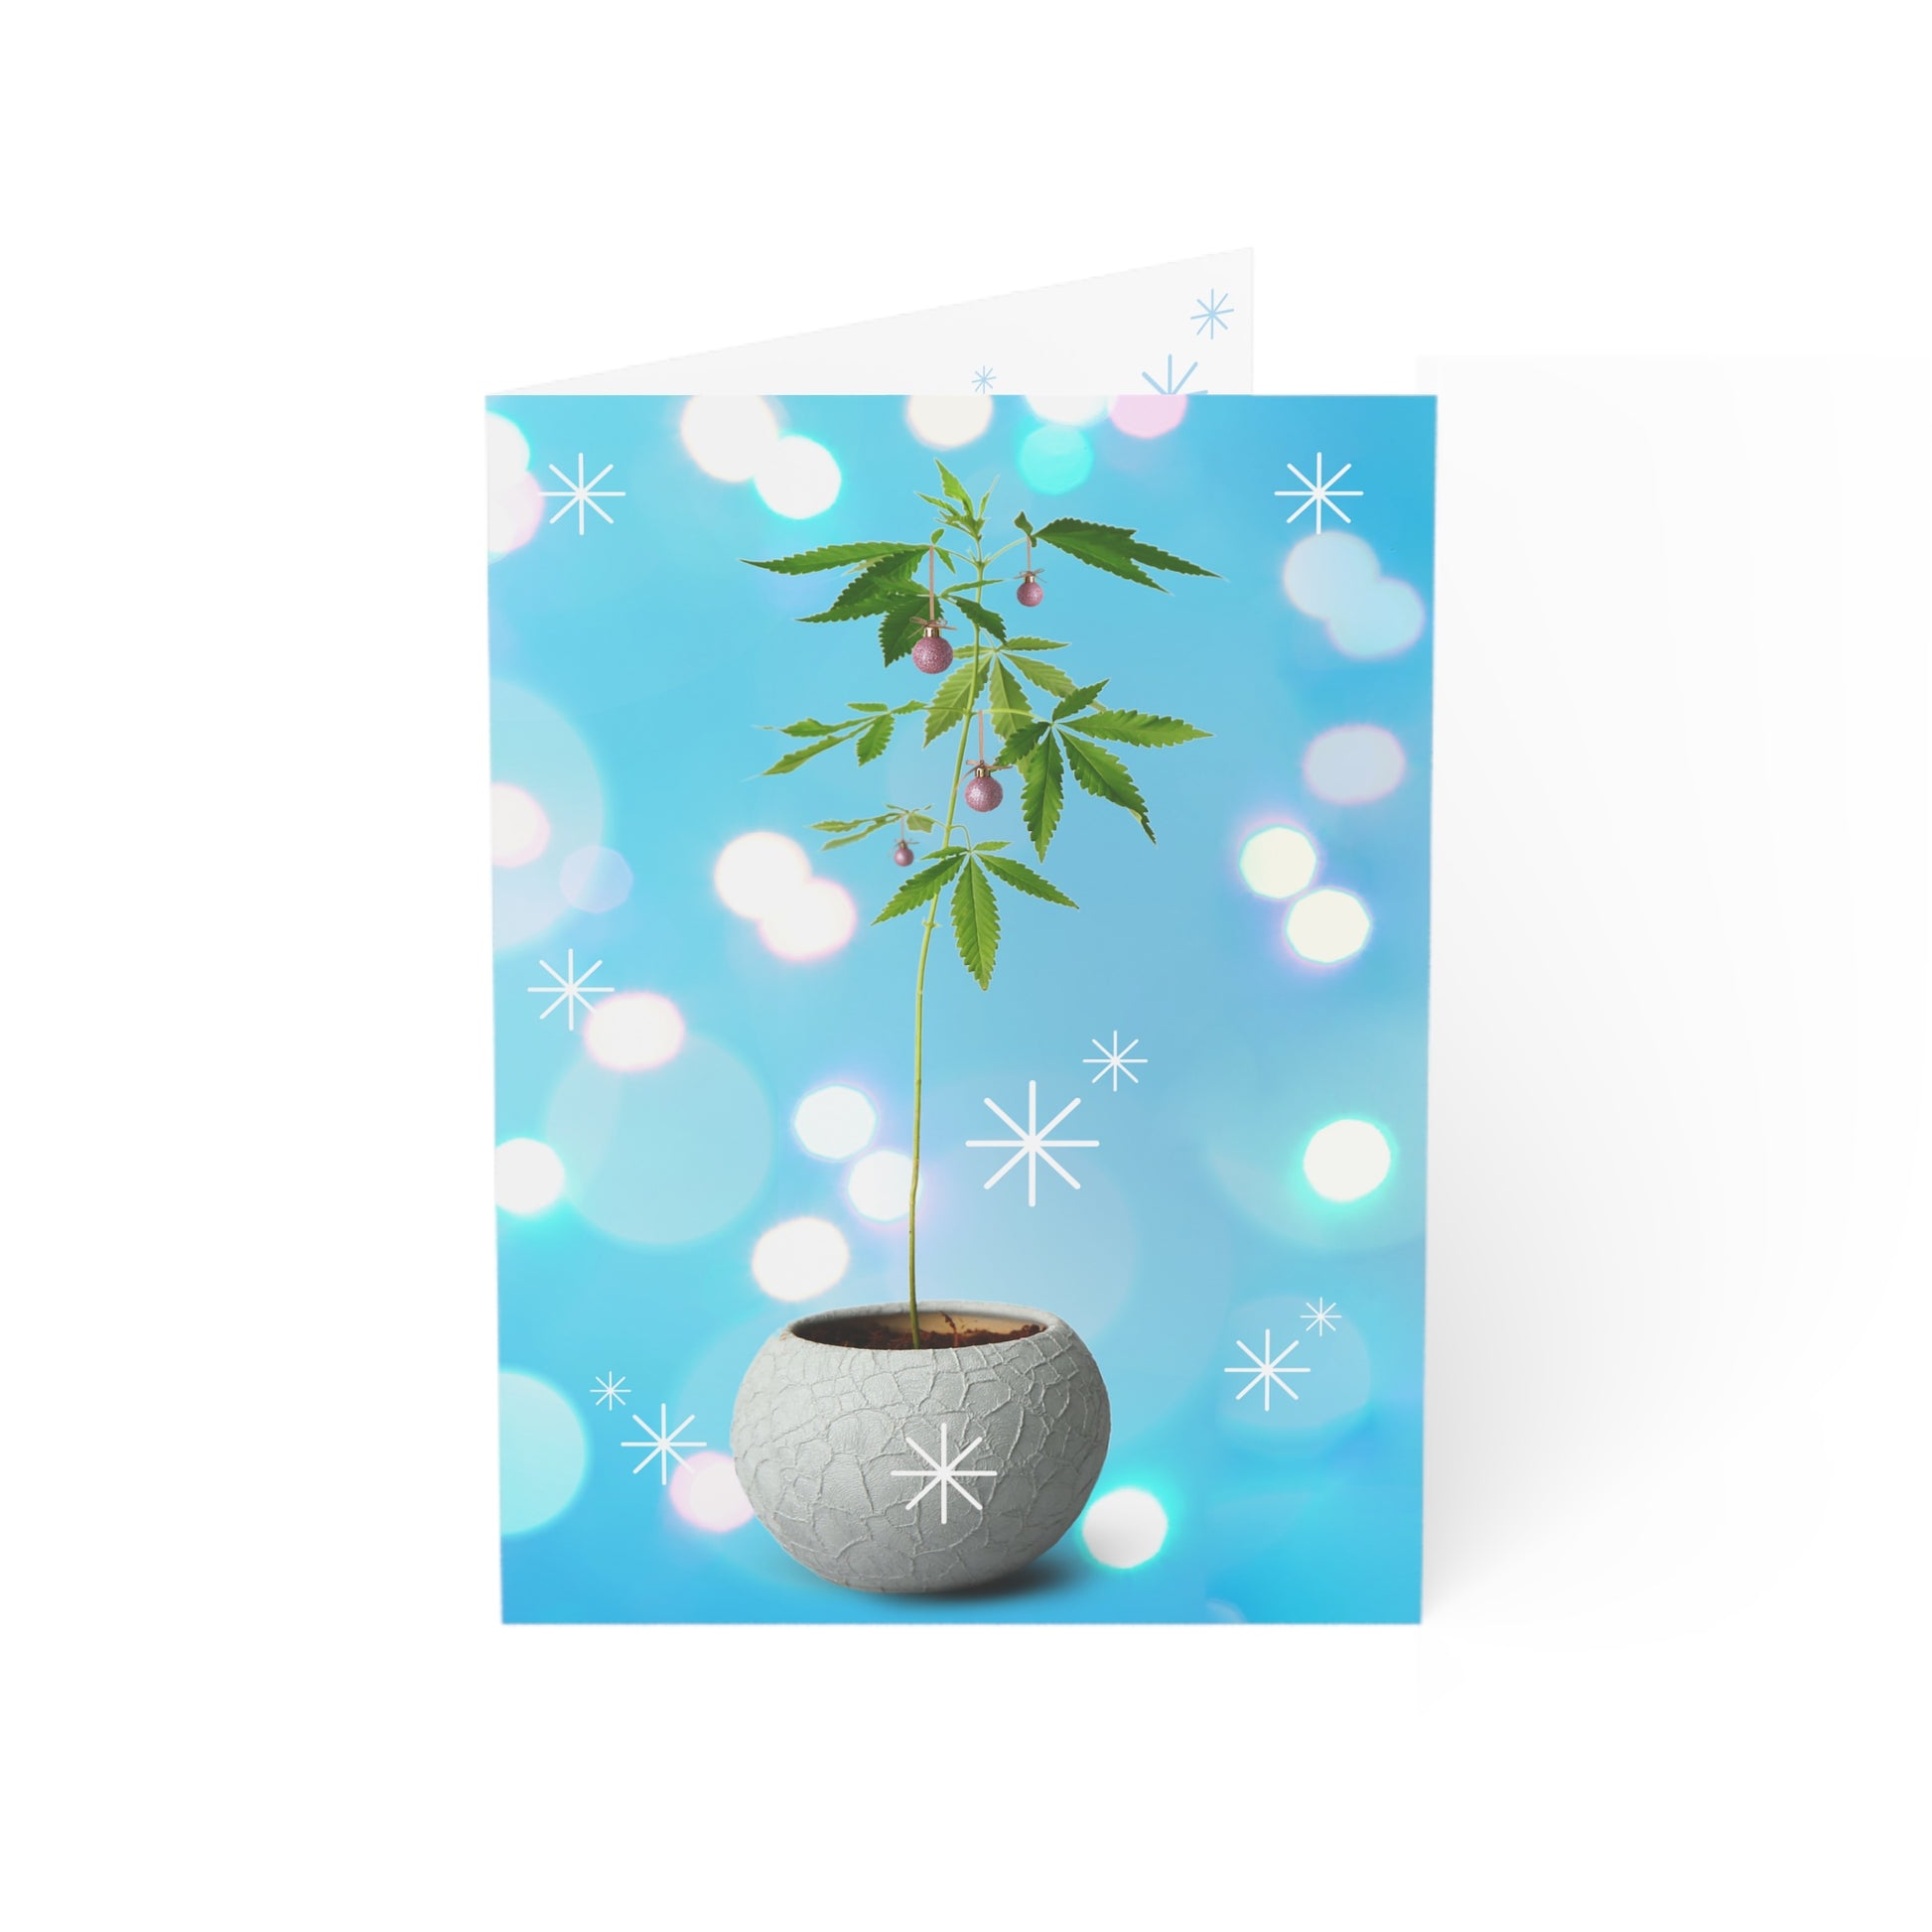 A small Christmas Marijuana plant with visible buds, growing in a spherical ceramic pot, against a bright blue background with white sparkles, ideal for featuring on sustainable paper cards.